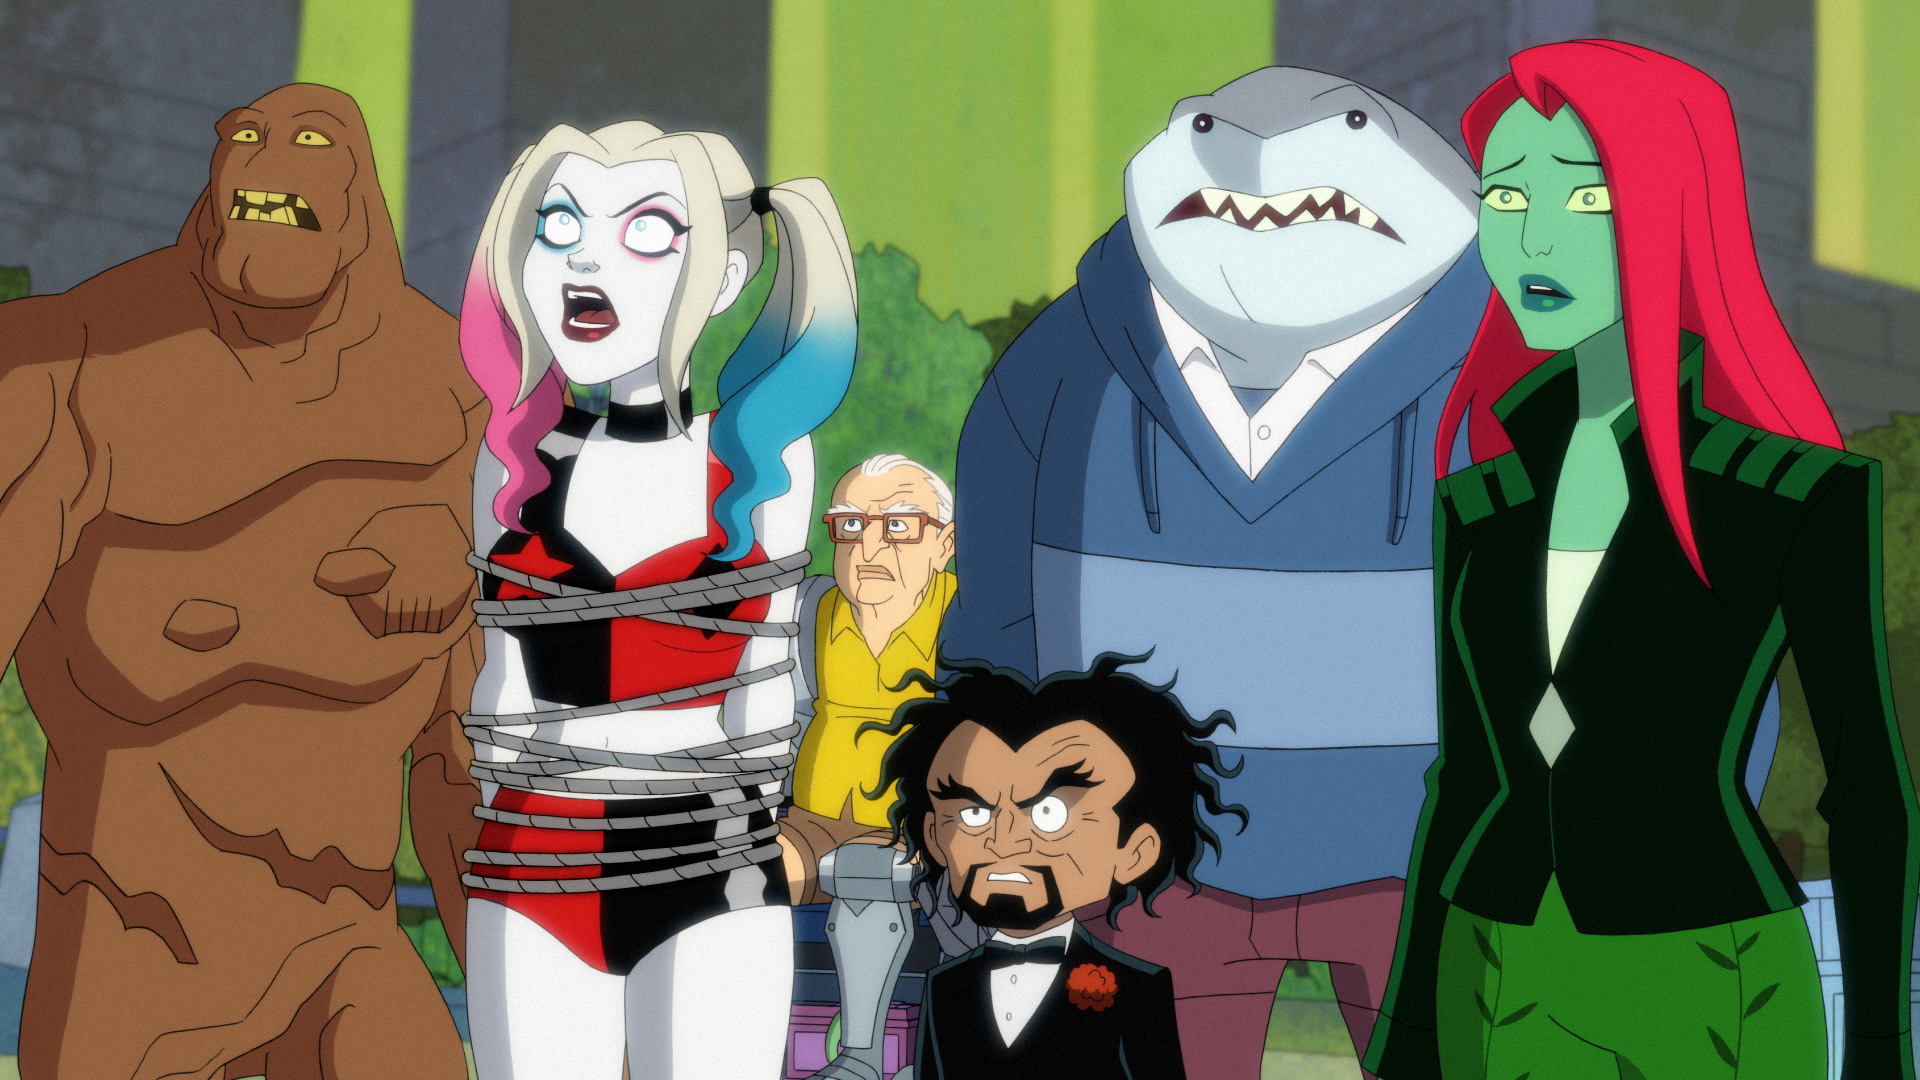 Harley Quinn: The Complete First and Second Seasons